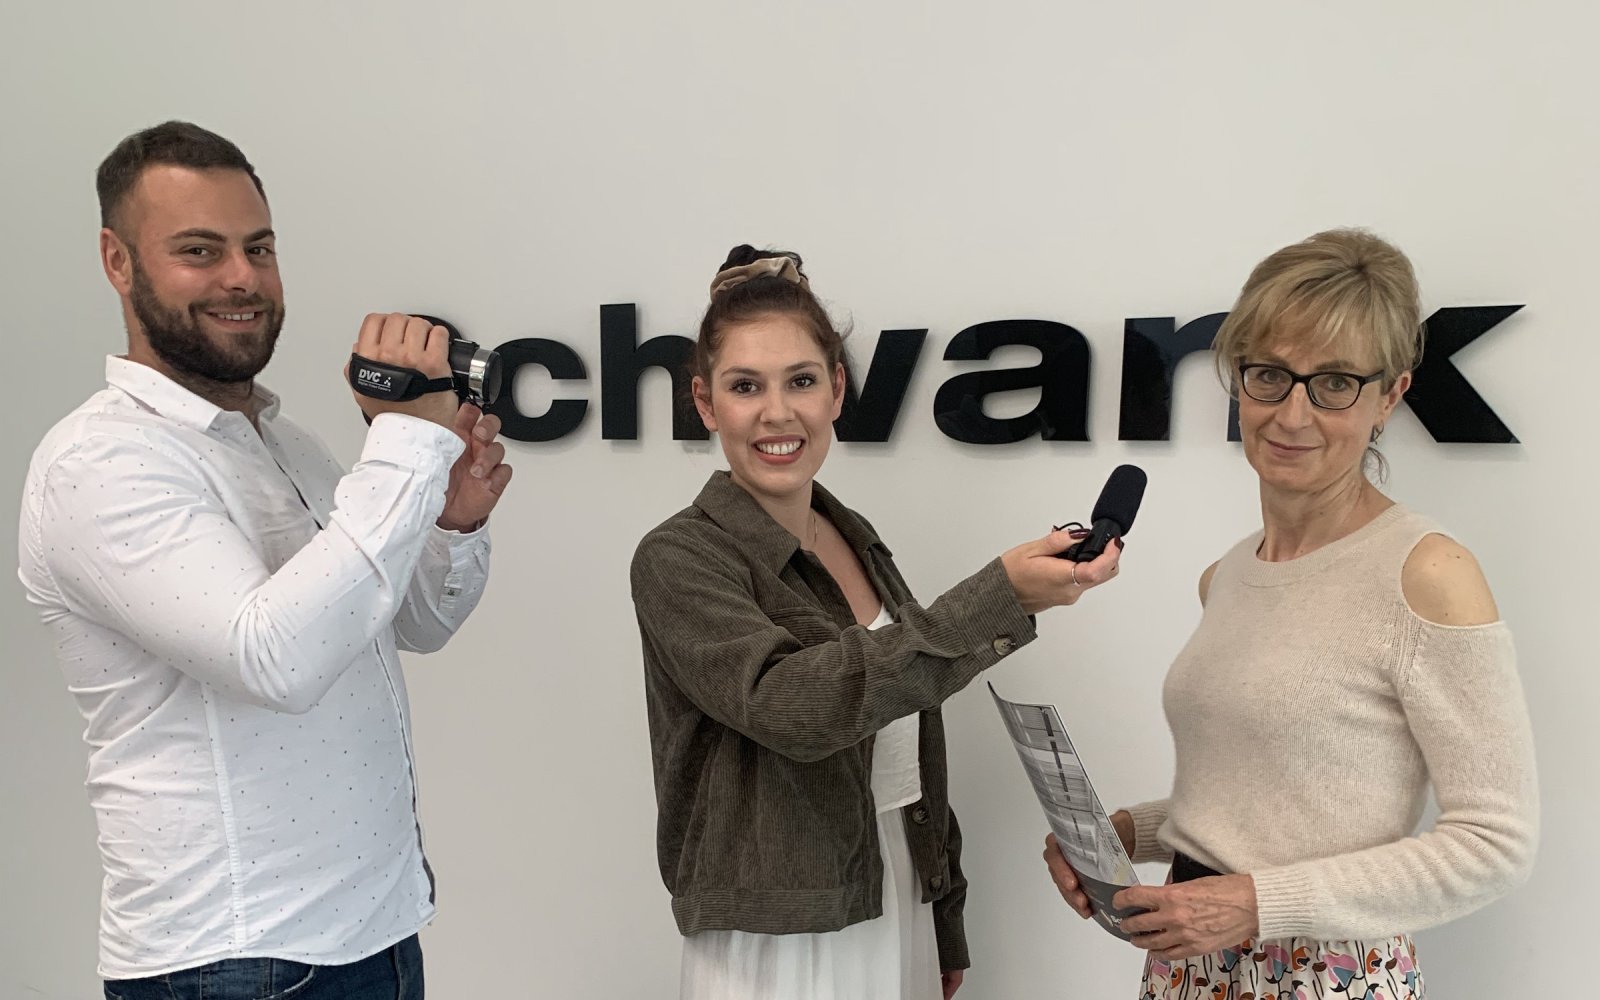 Employees from the marketing department at Schwank.